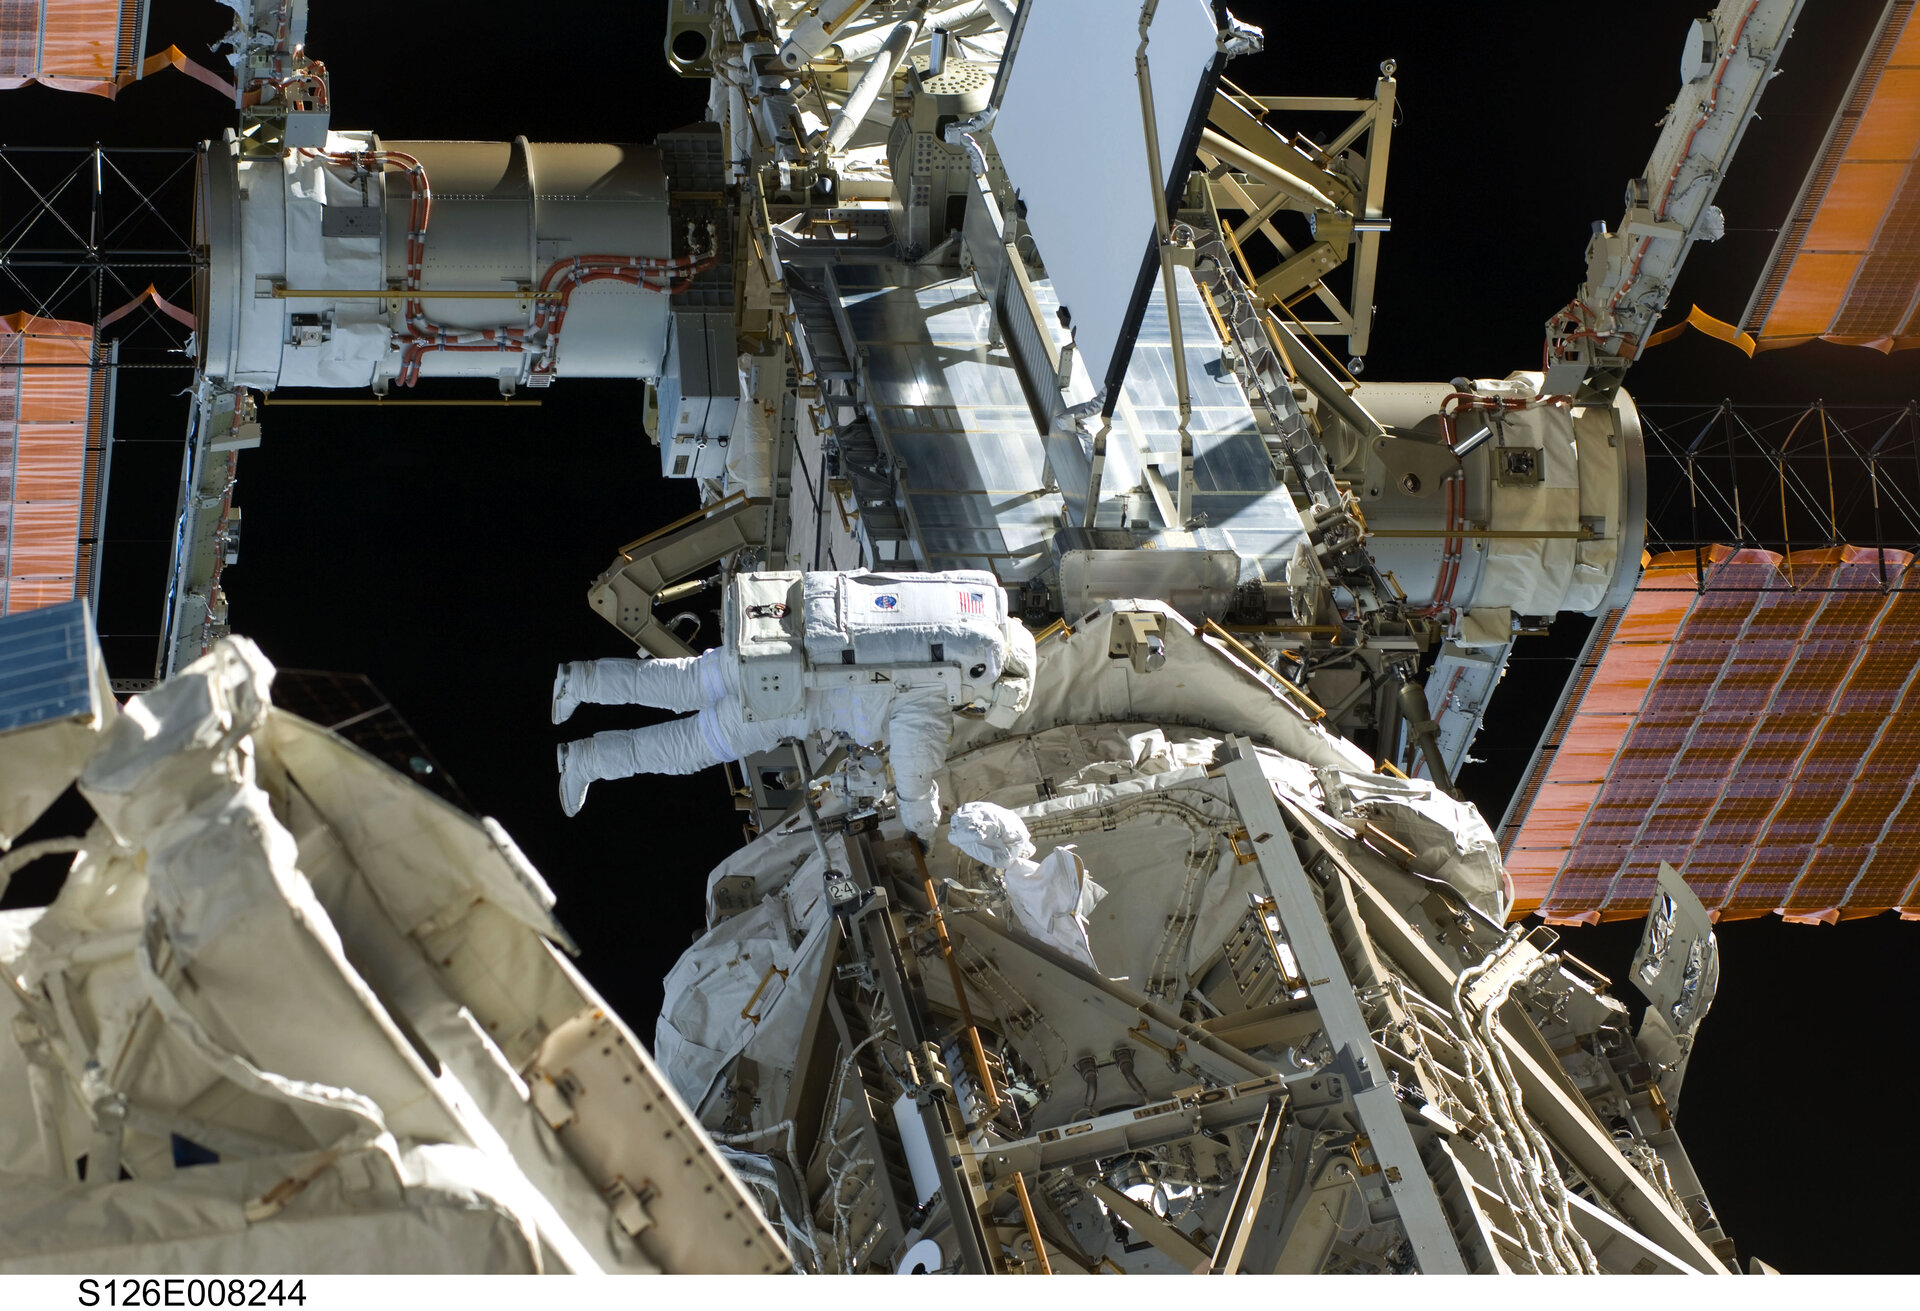 Space Station spacewalk during Shuttle mission STS-126